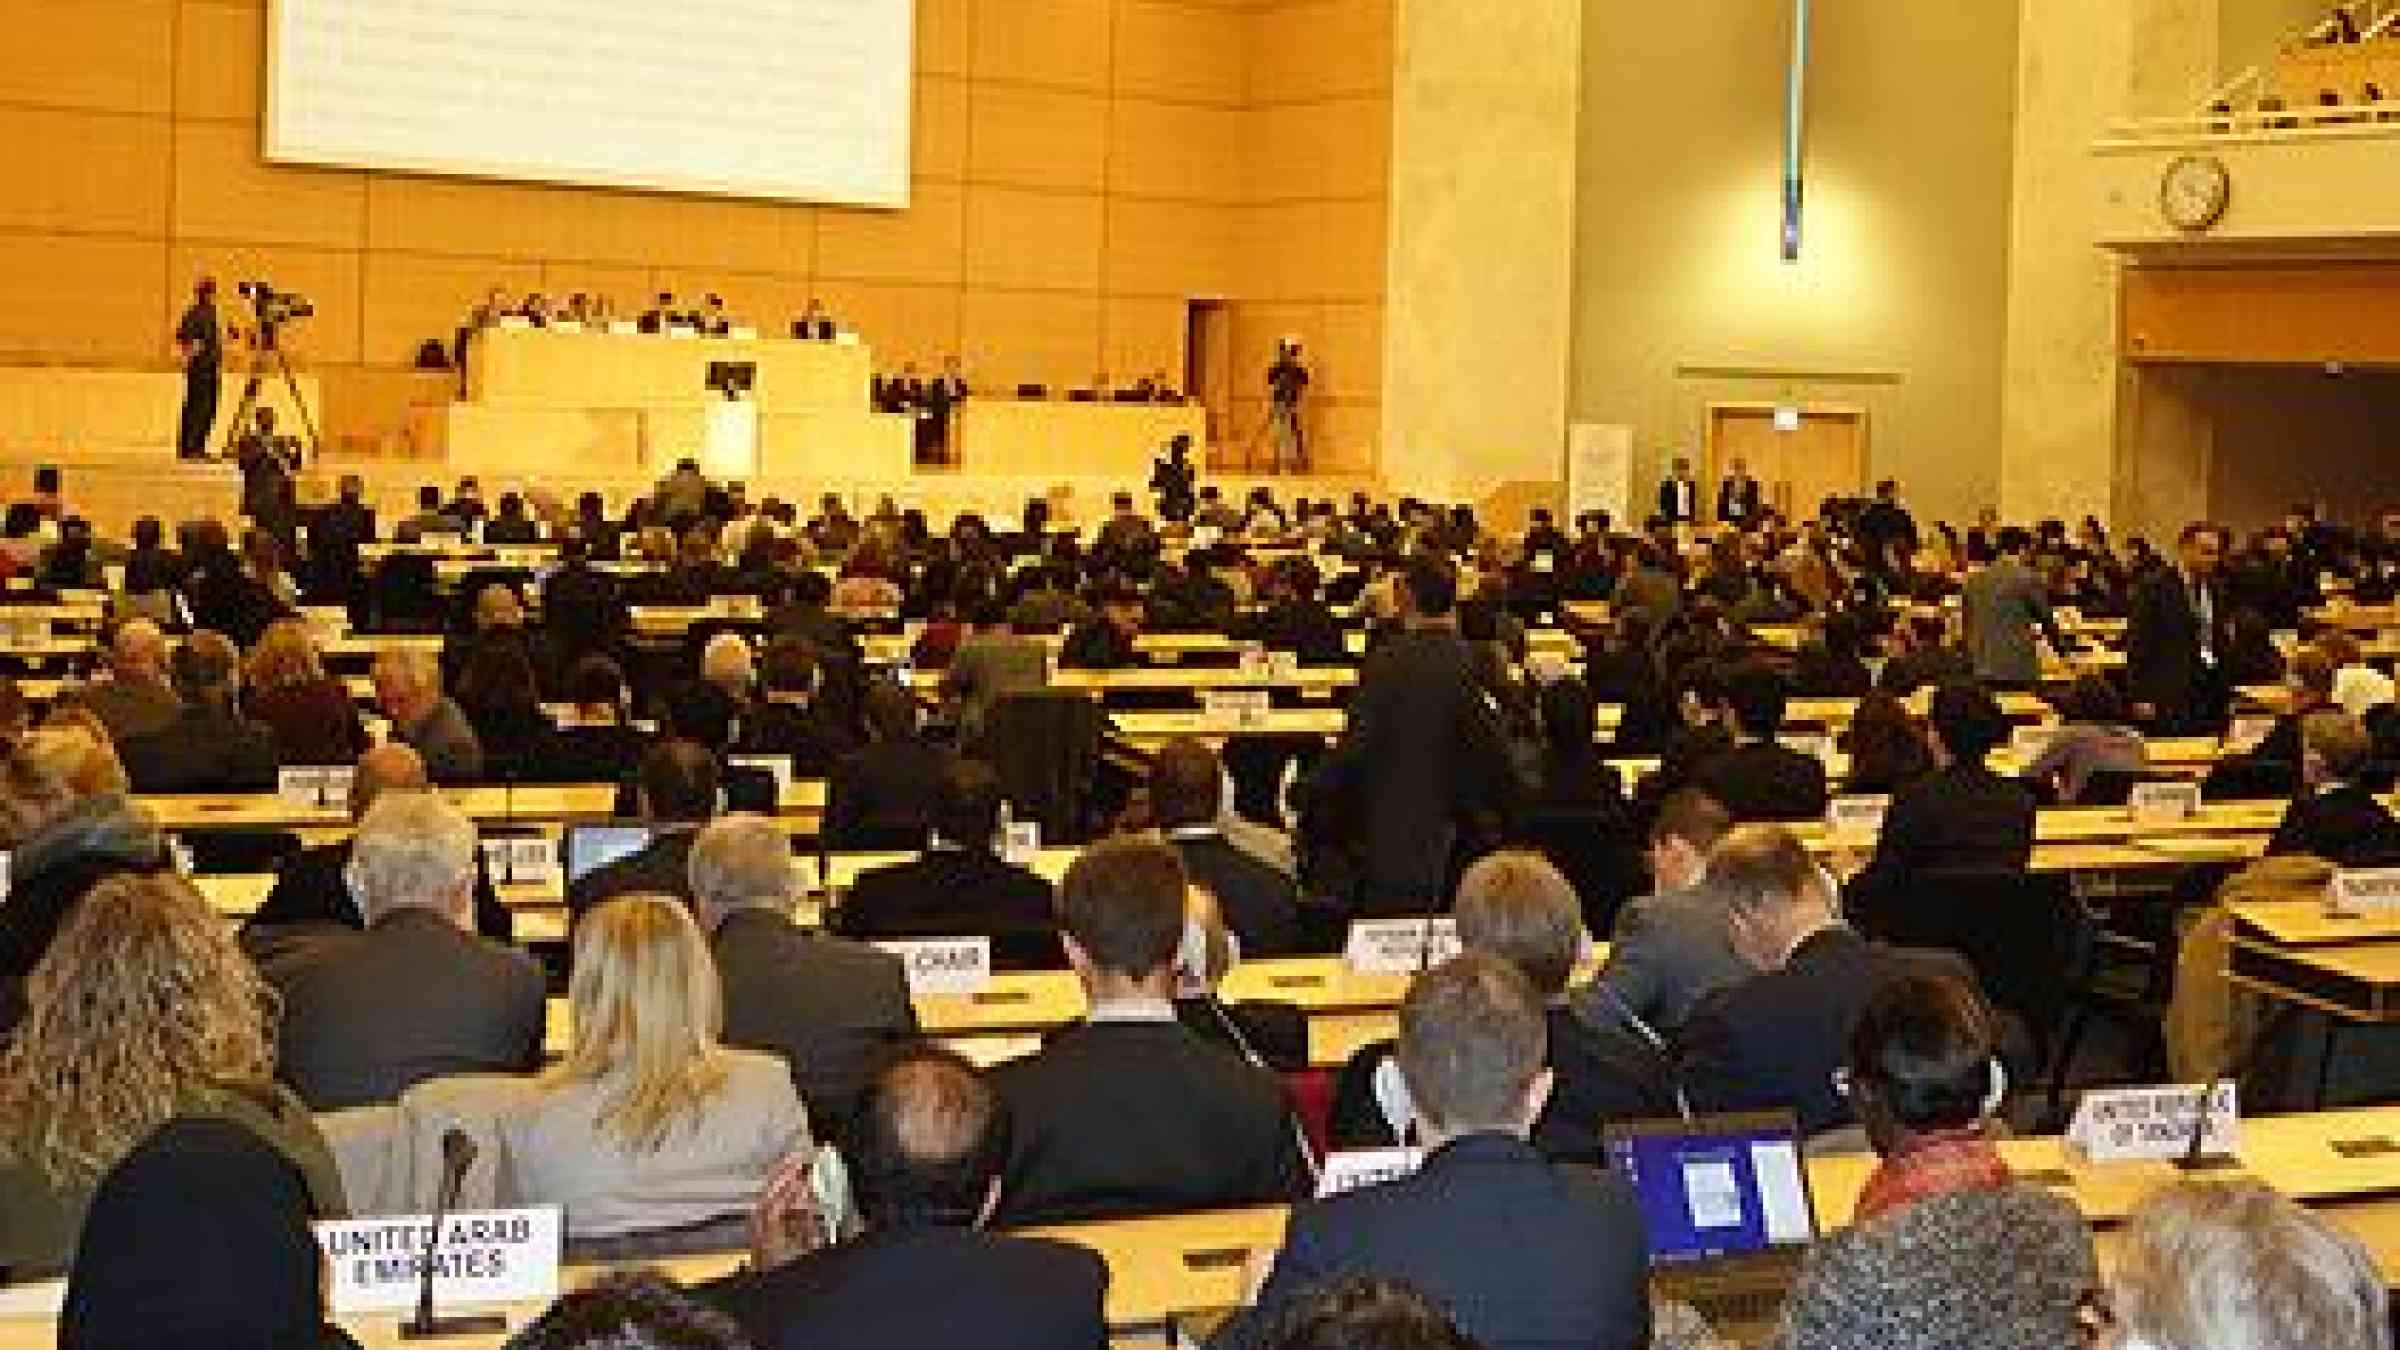 The second Preparatory Committee meeting for the Third UN World Conference on Disaster Risk Reduction opened in Geneva today. (Photo: UNISDR)